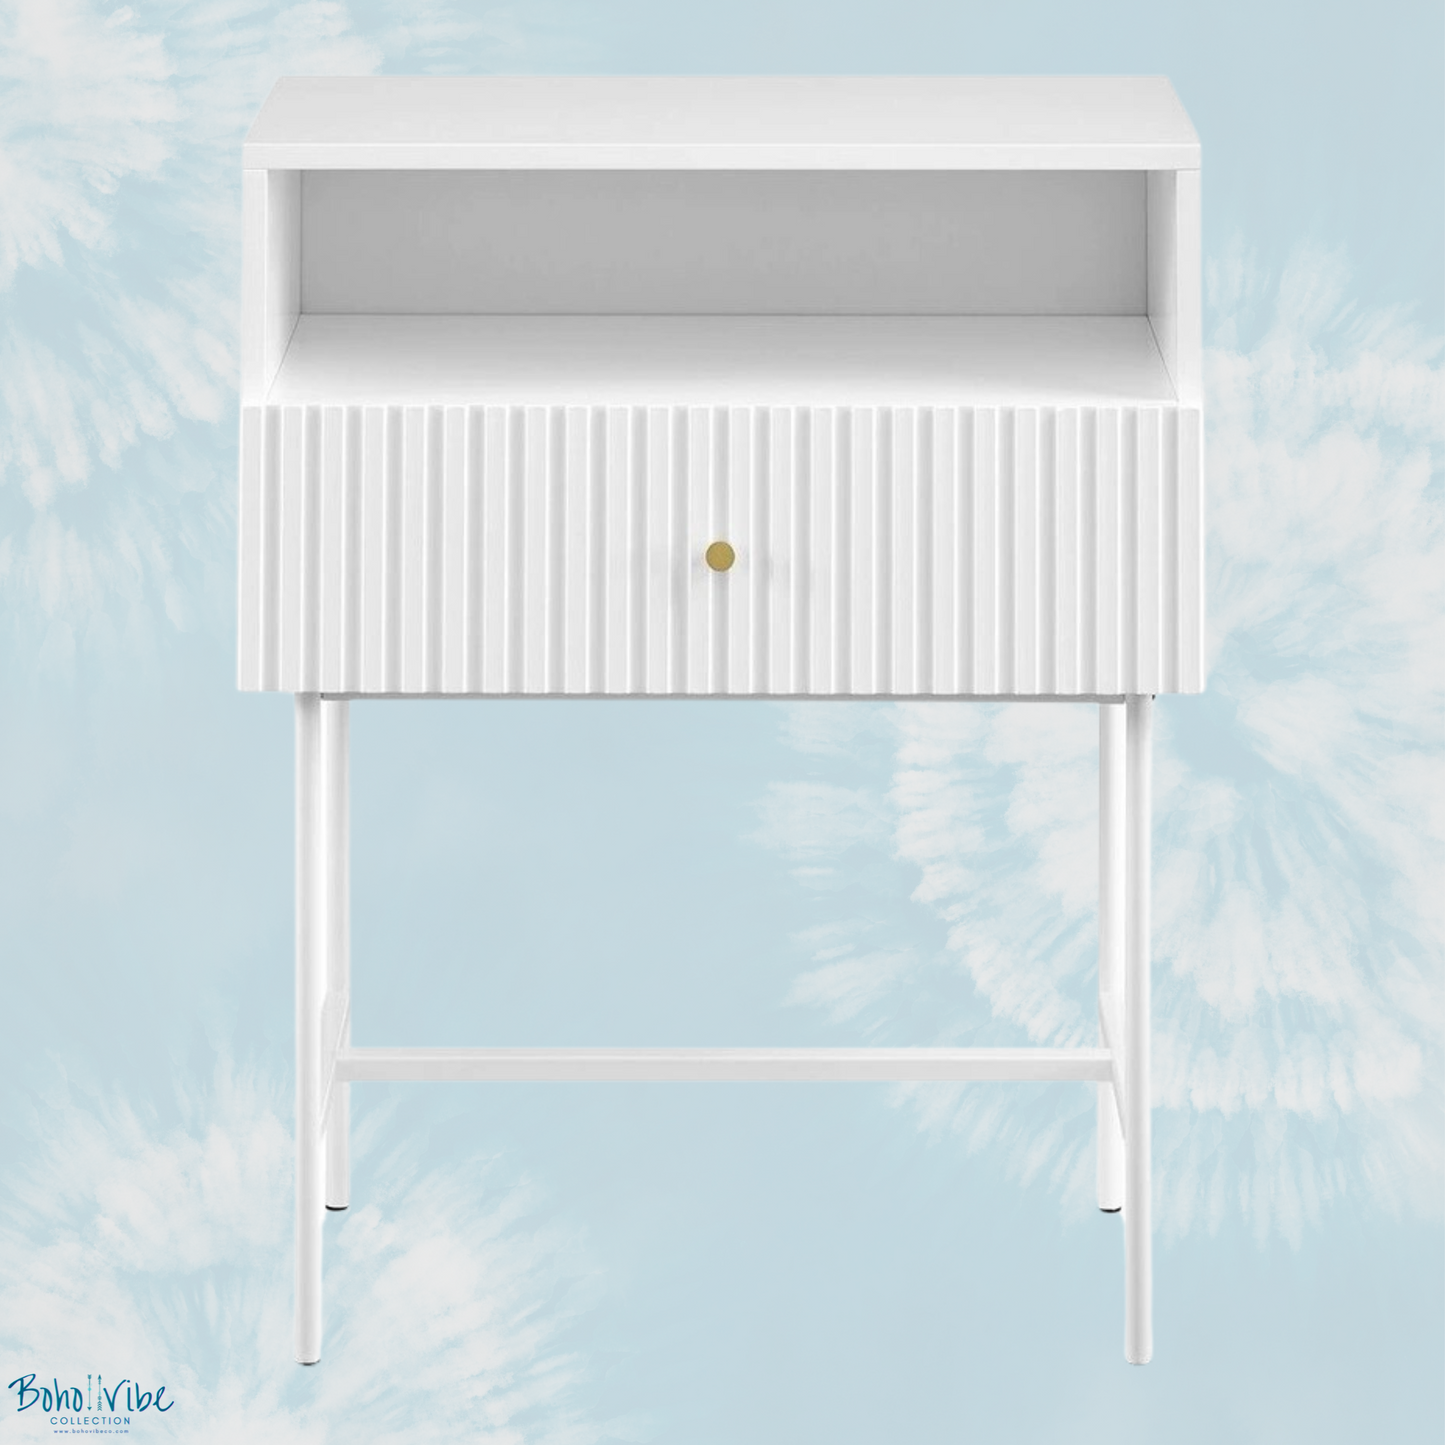   Boho ↡↟ Vibe Collection ↠ Chic Coastal Fluted Nightstand, White Finish, Gold Touches 1 Drawer ↡